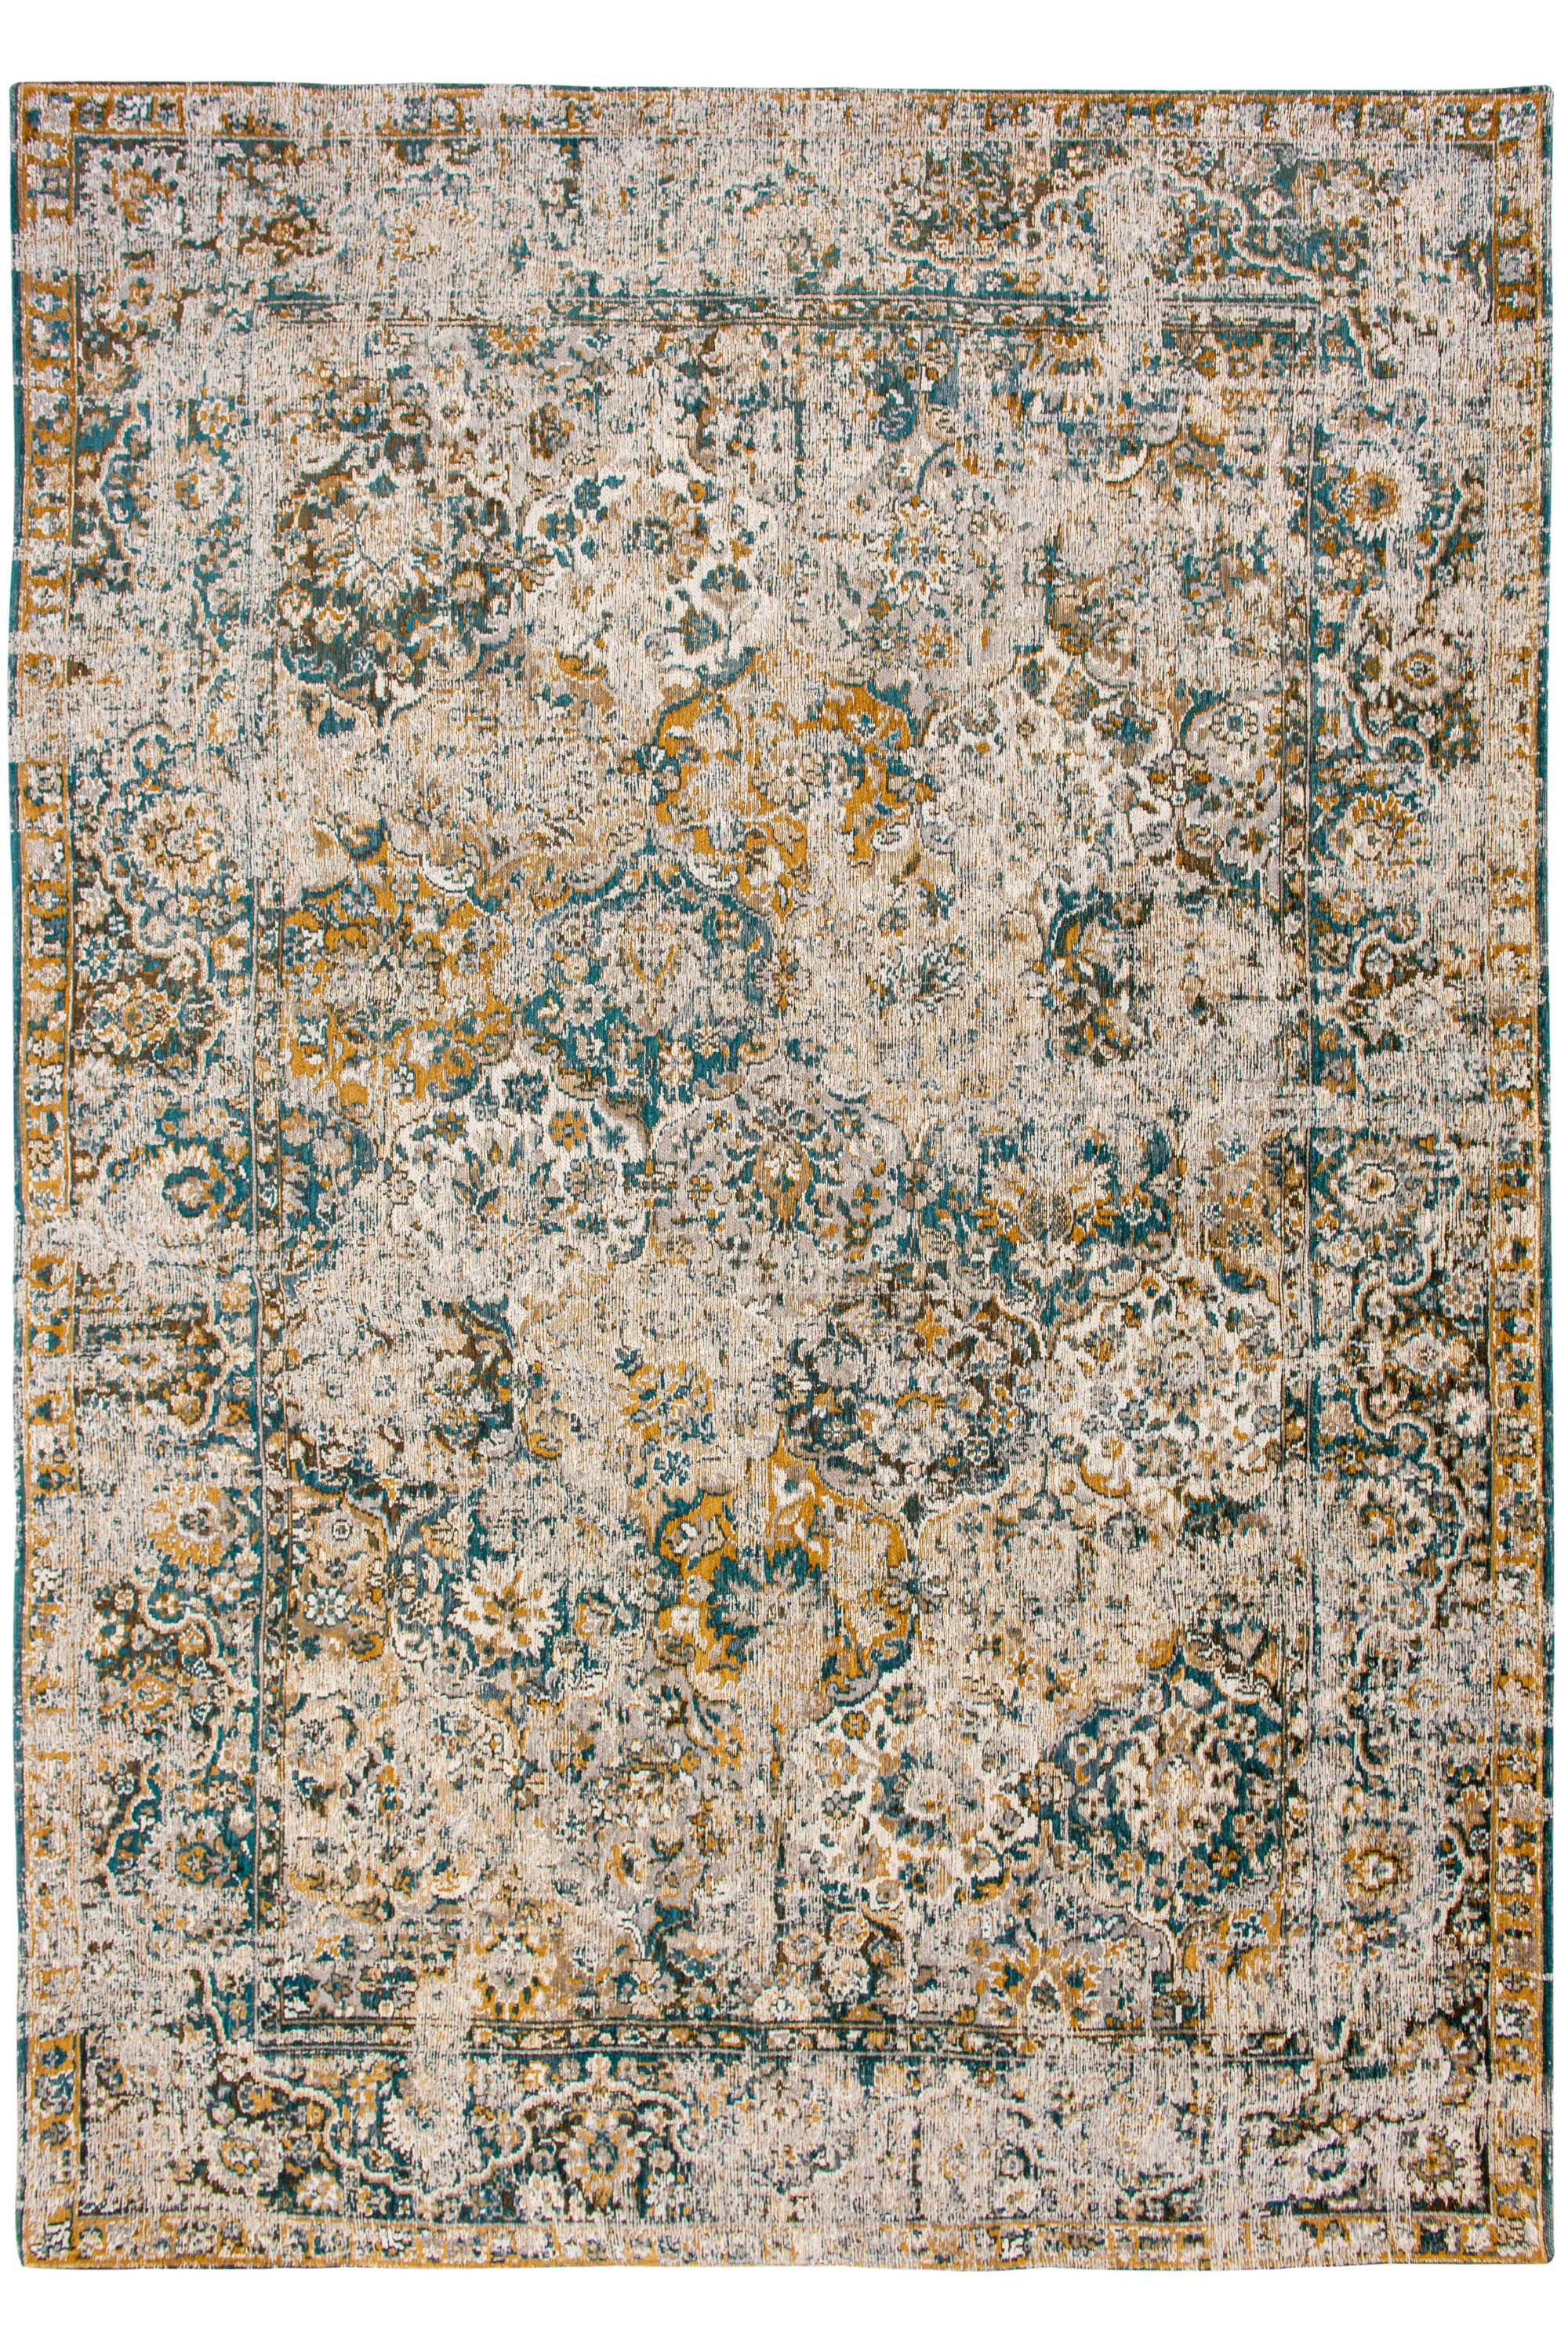 white, blue and yellow vintage style rug